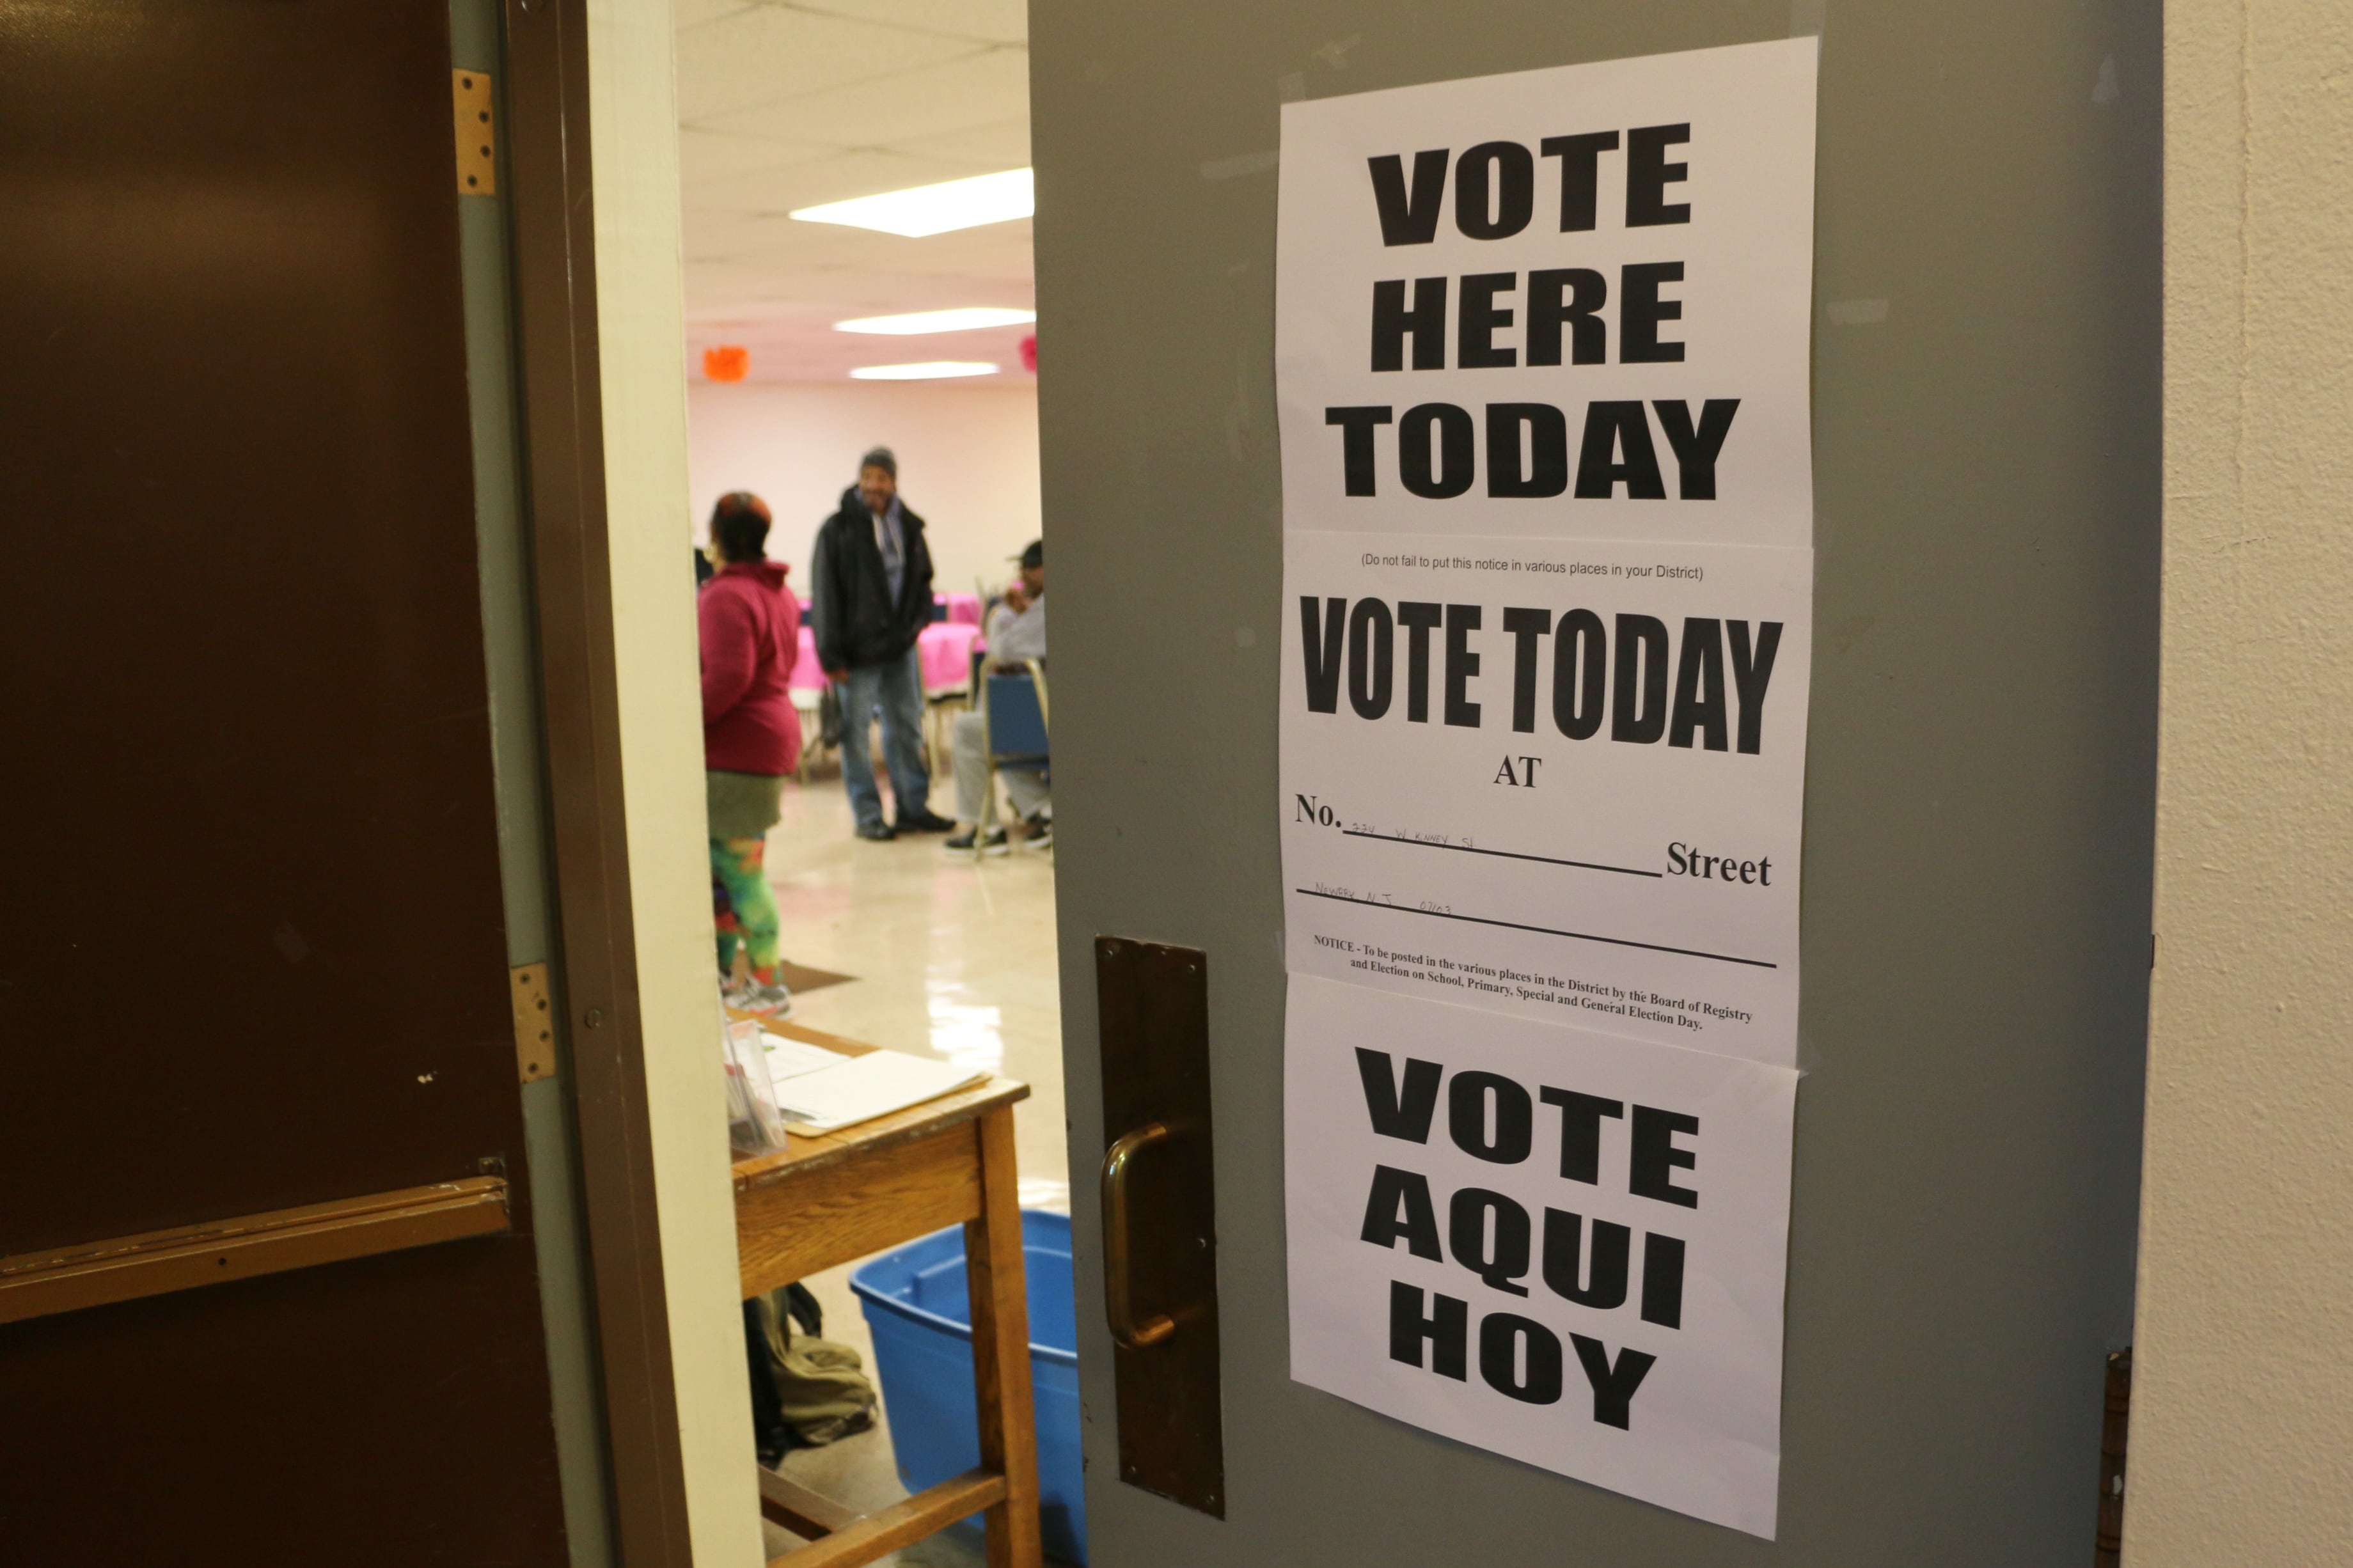 A door with white signs and black words that says "Vote here today. Vote today. and Vote aqui hoy." There are people in the background inside the room.